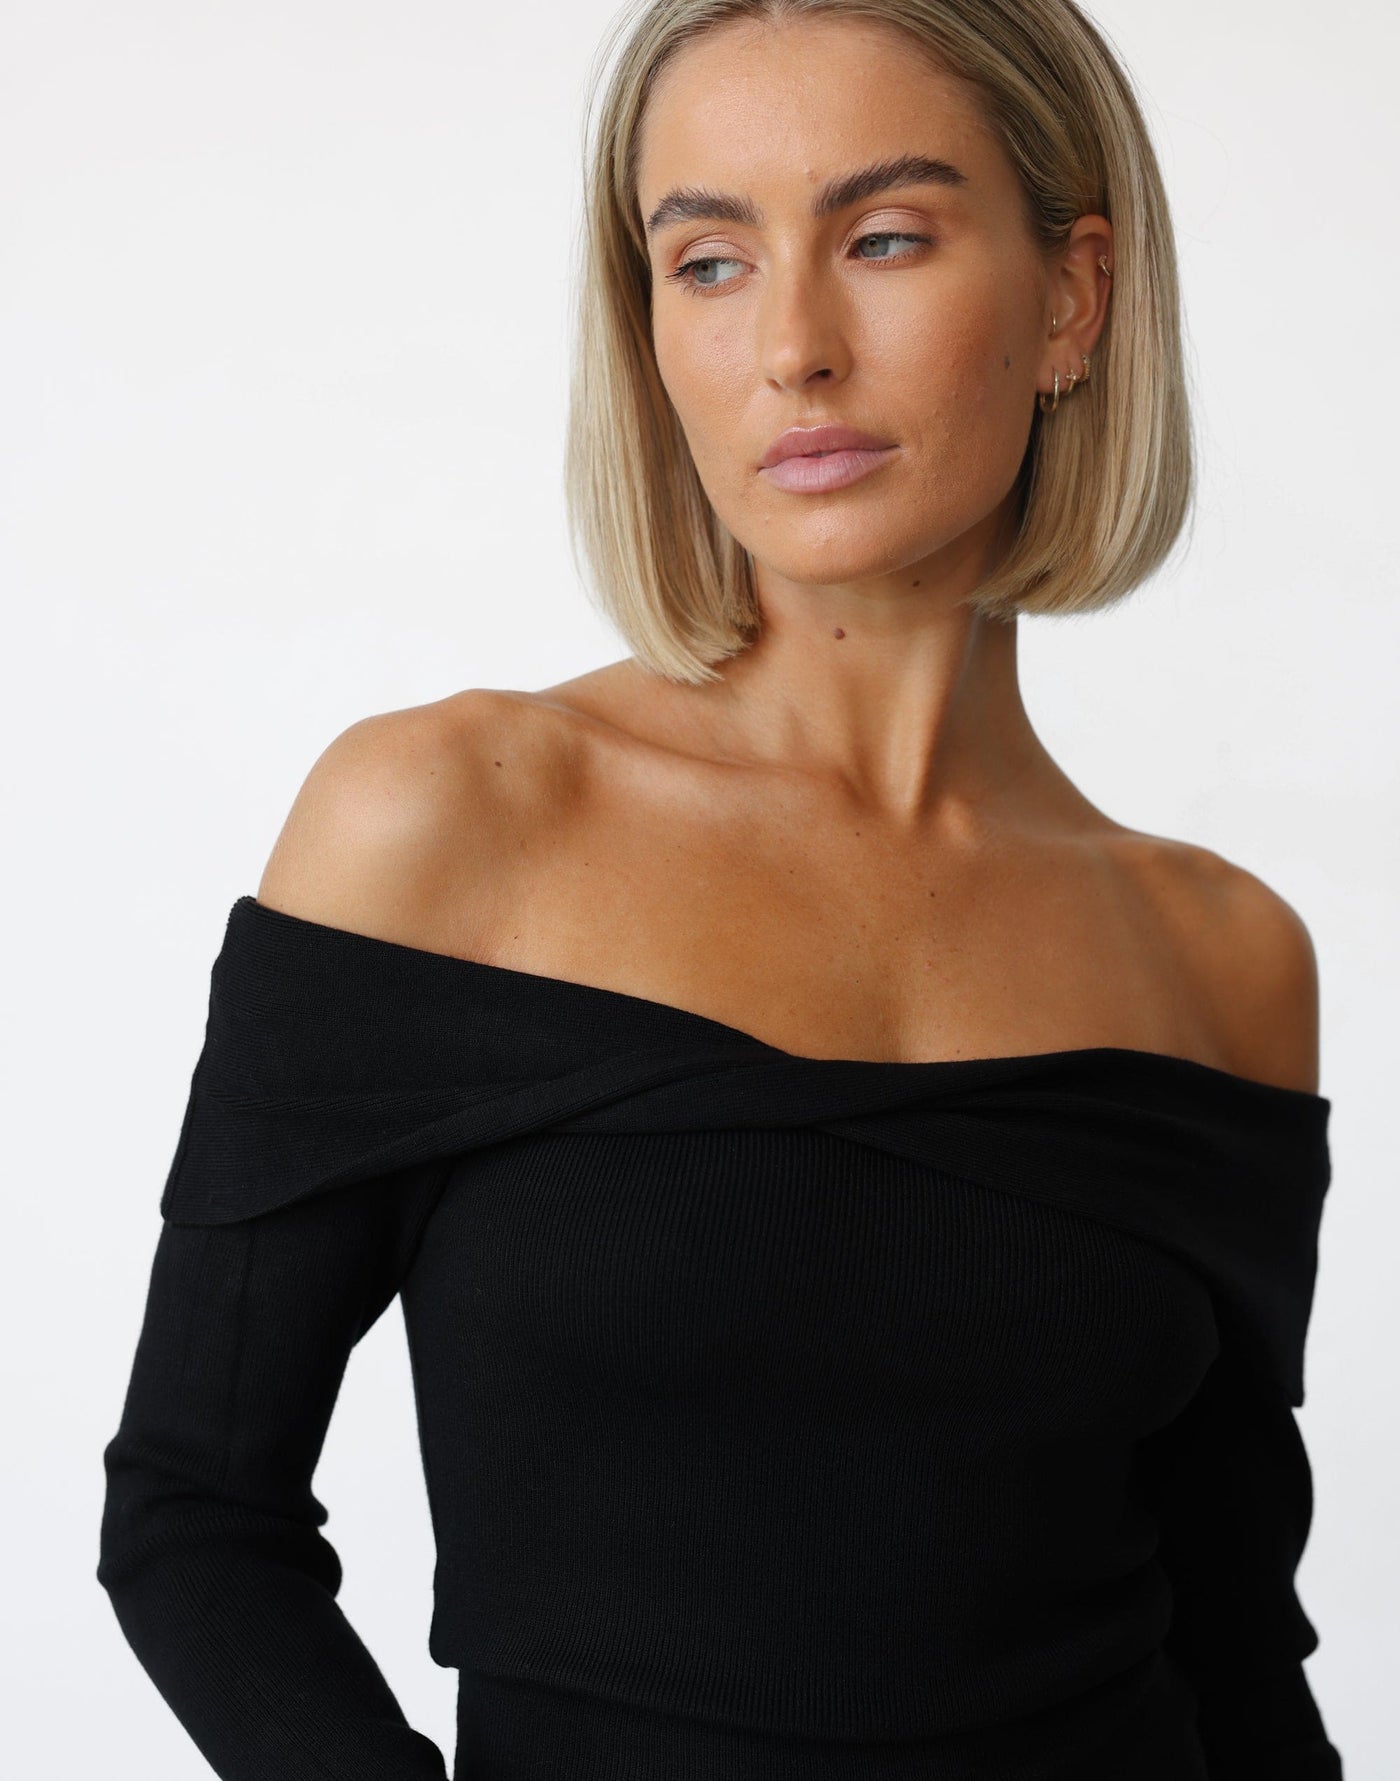 Elena Top (Black) - Crossed Front High Neck Ribbed Knit Long Sleeve - Women's Top - Charcoal Clothing